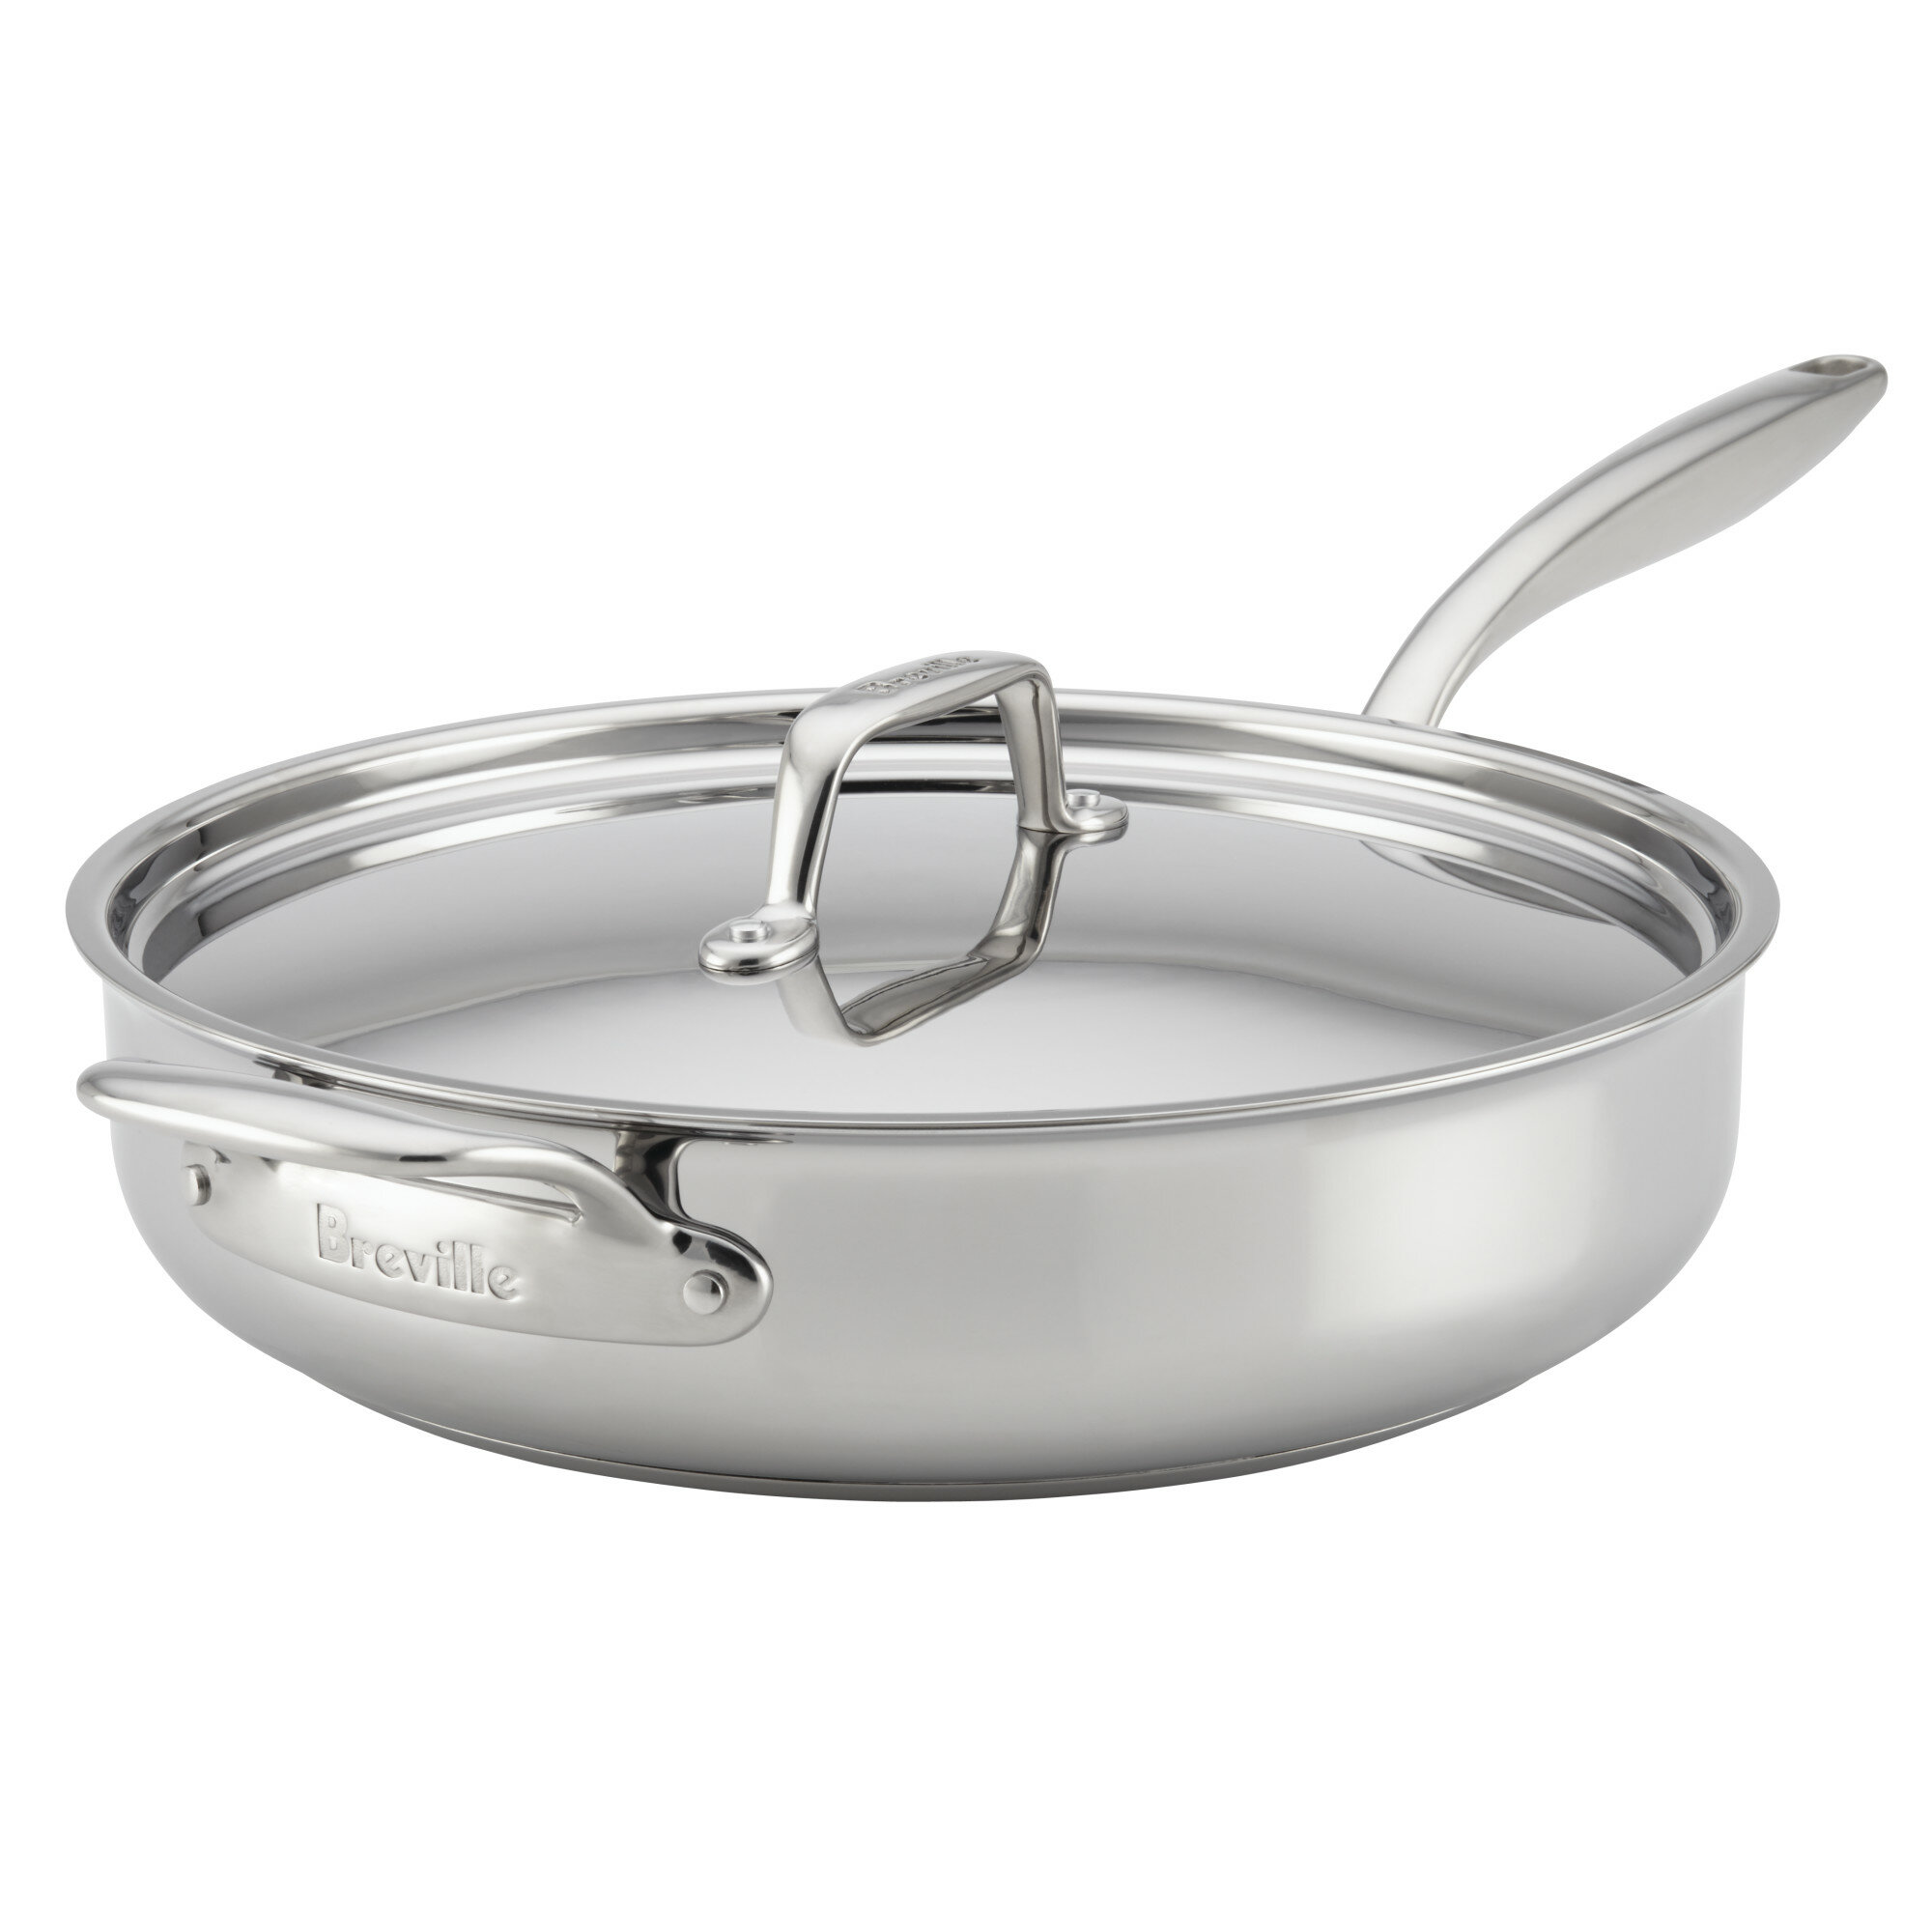 All-Clad d3 Stainless Steel 3-Qt. Saute Pan with Lid + Reviews | Crate &  Barrel